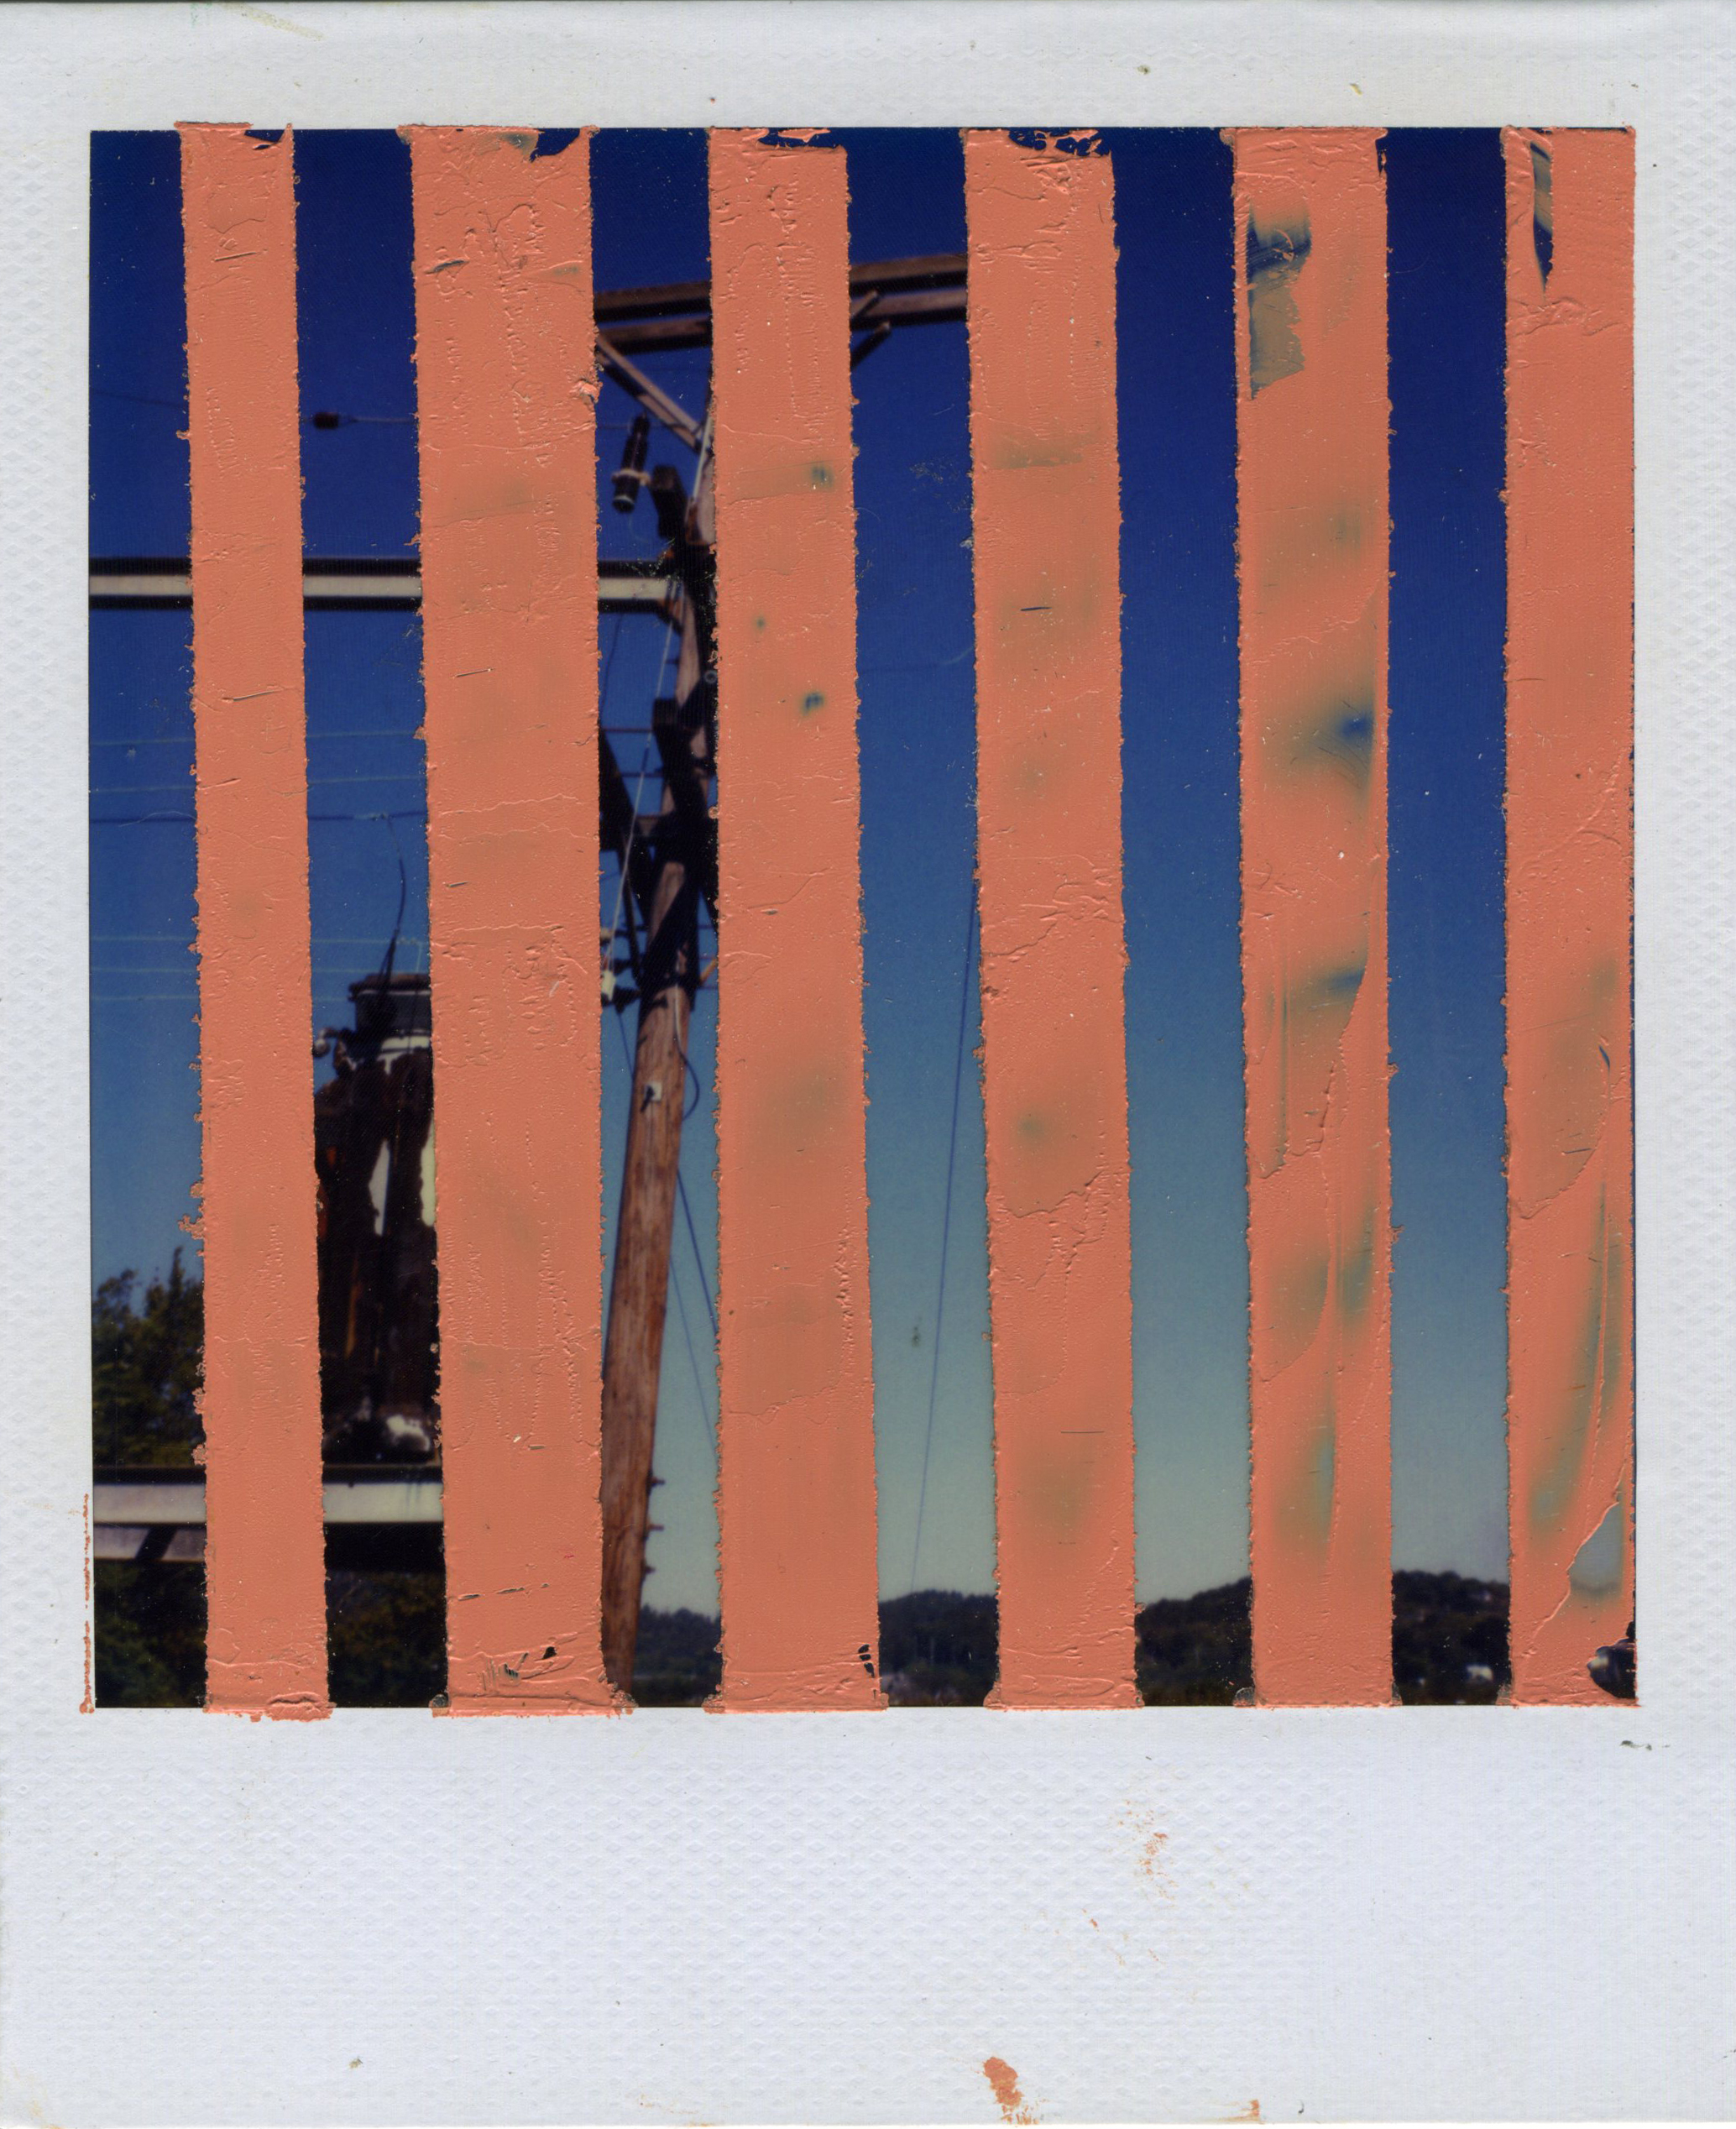   INTERSECTION (VERTICAL HOLD)   oil on sx-70 Polaroid | 3.25" x 4.25" | 2013 